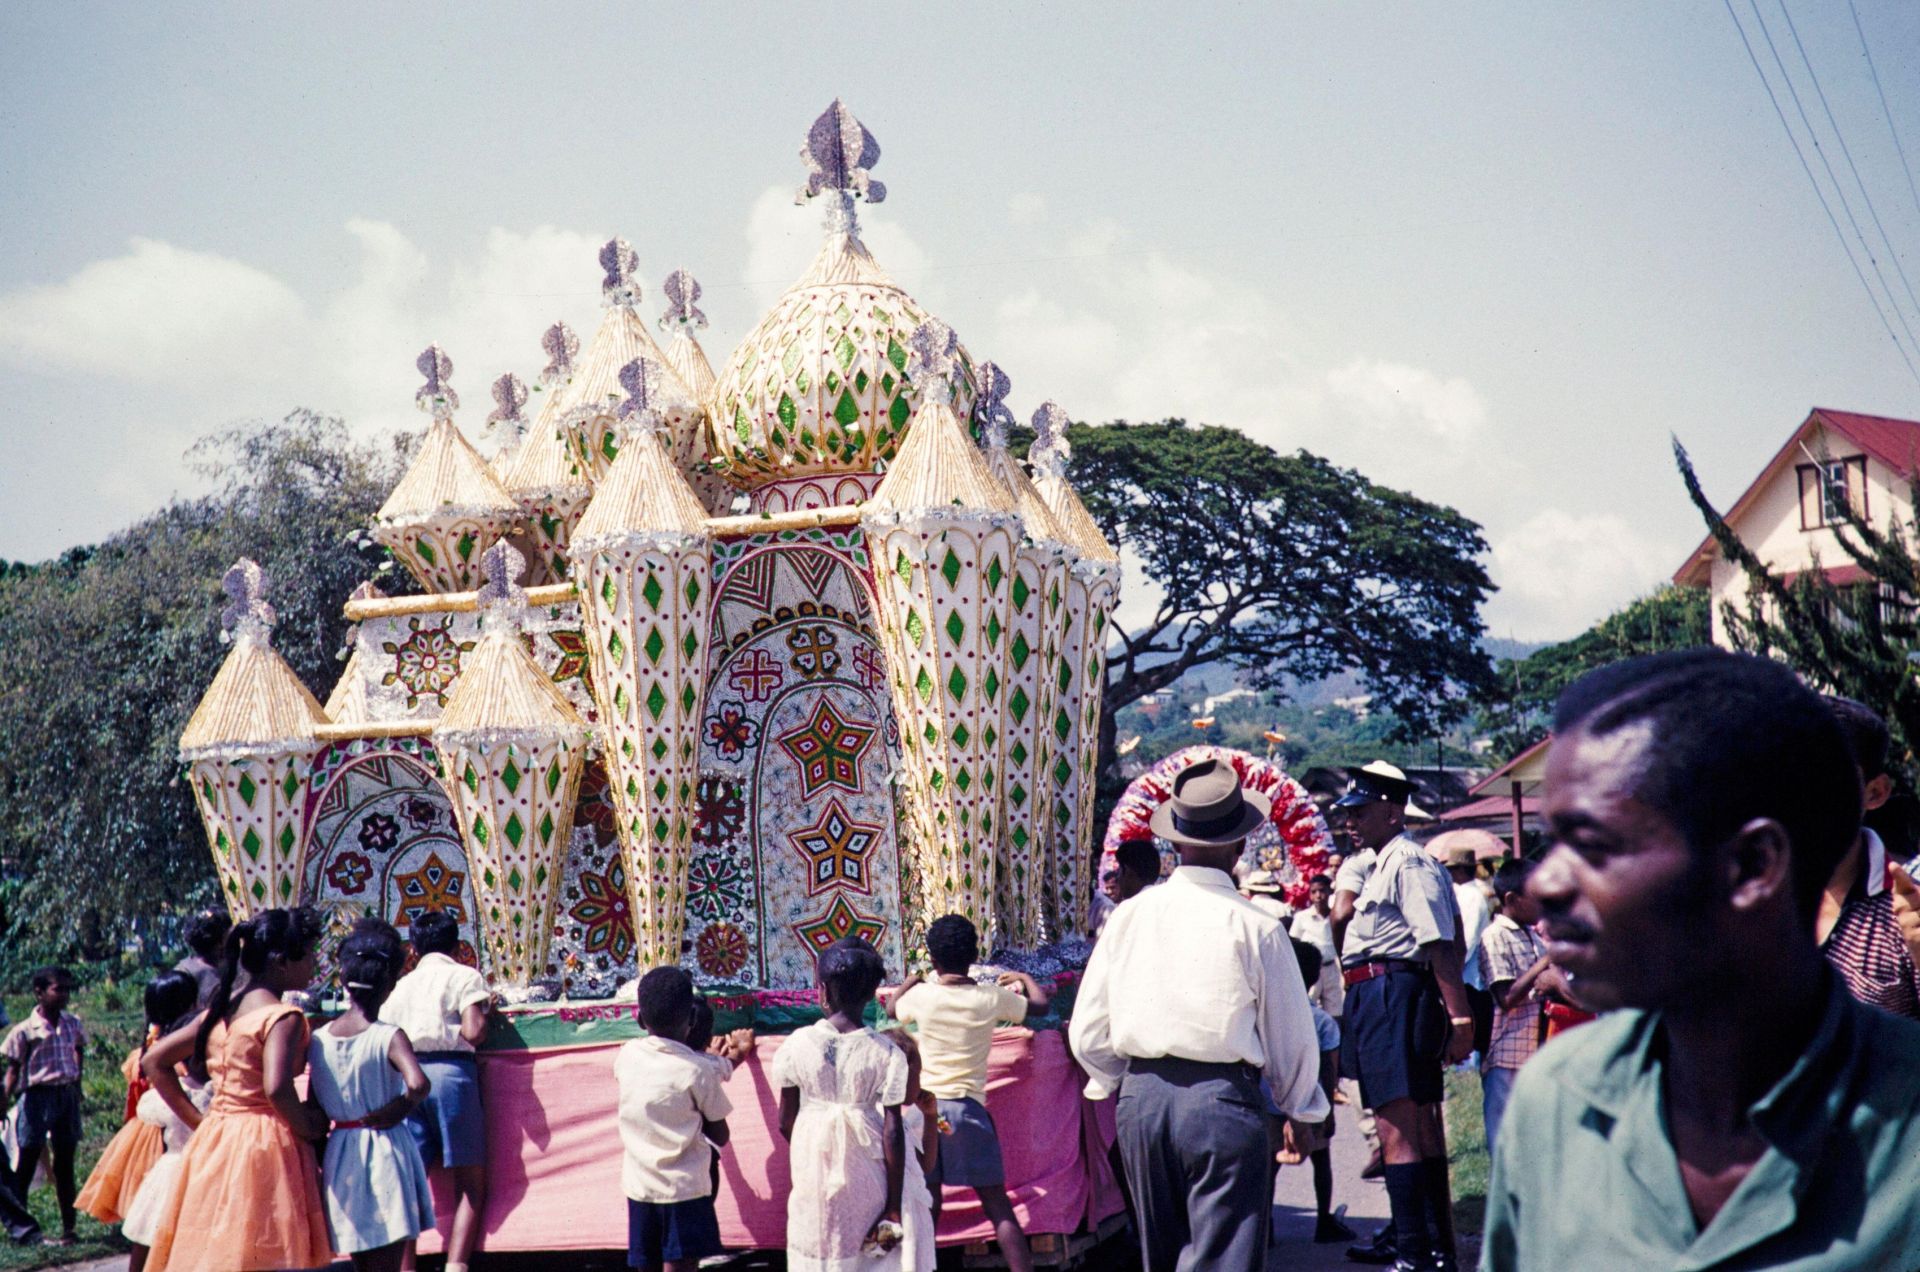 How the Cultures of Trinidad Transformed an Islamic Festival